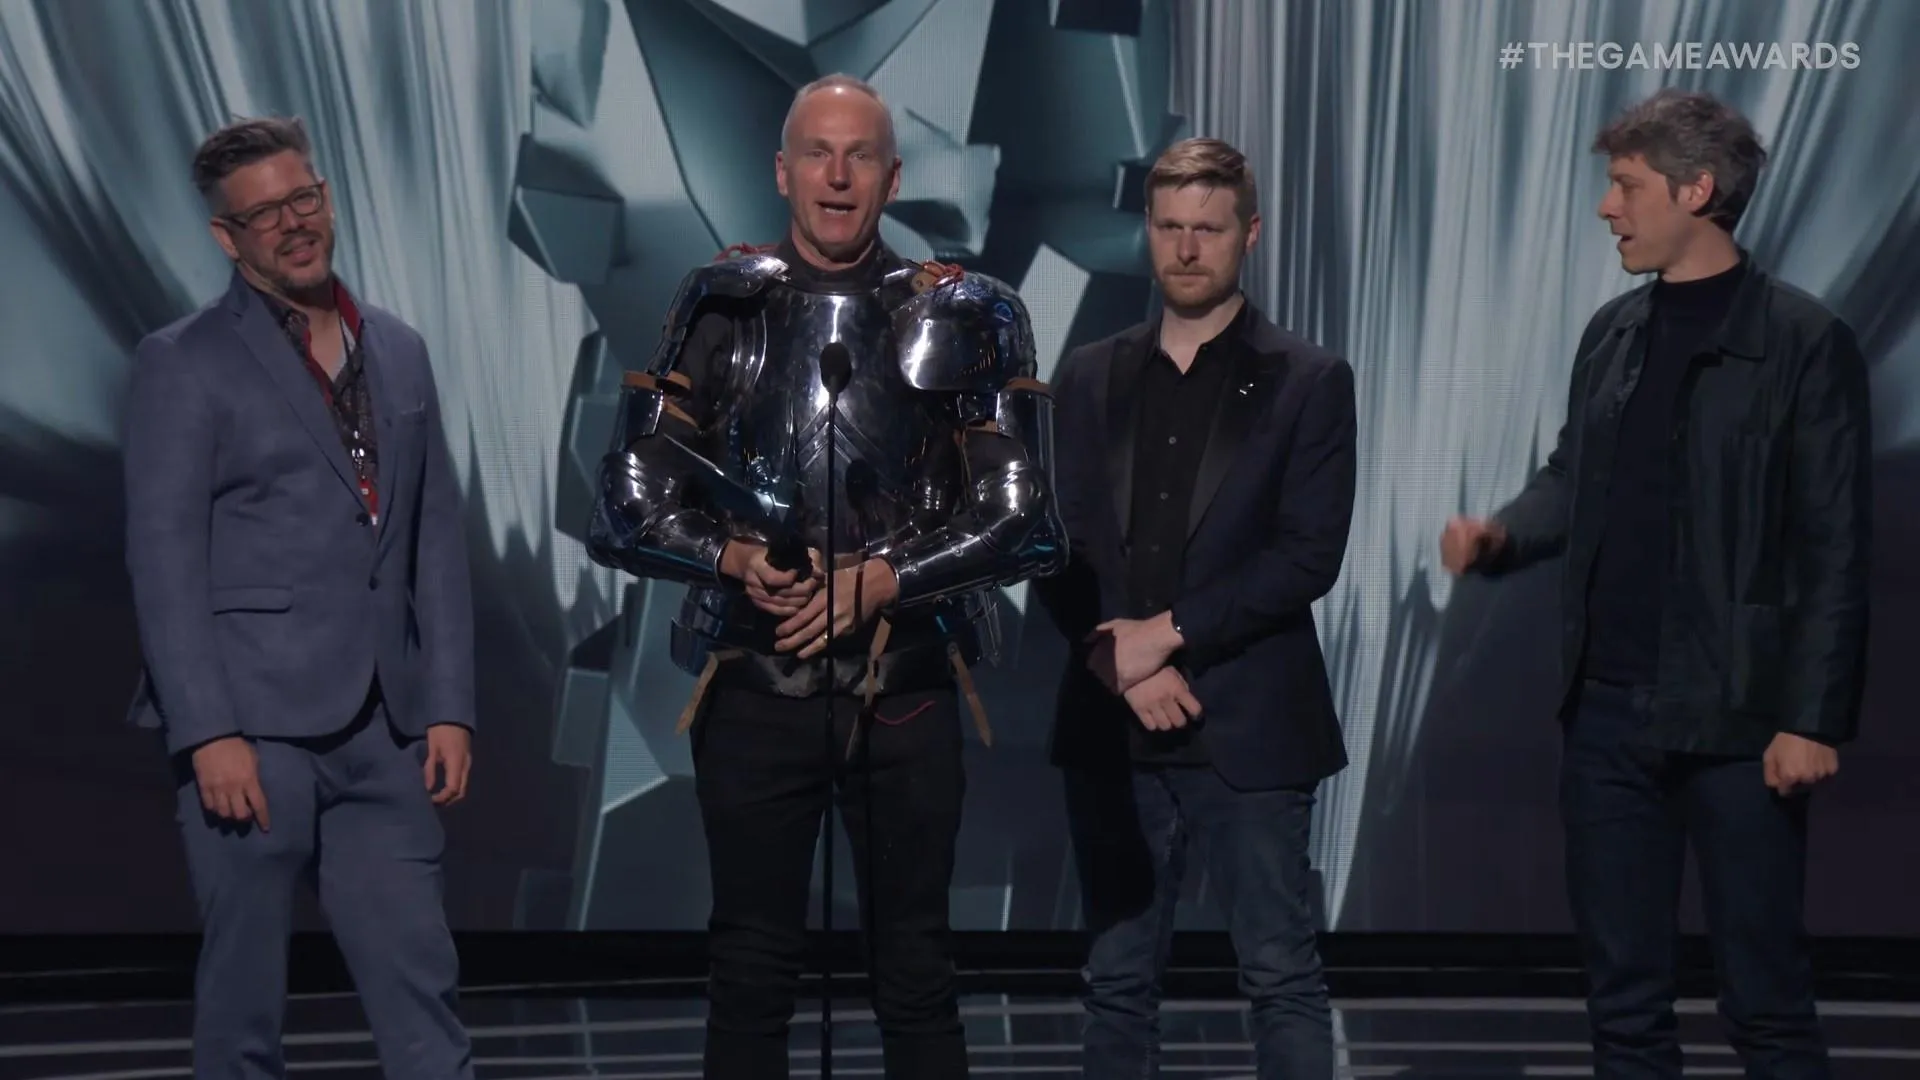 Swen Vincke accepting the Game of the Year award in his iconic suit of armor